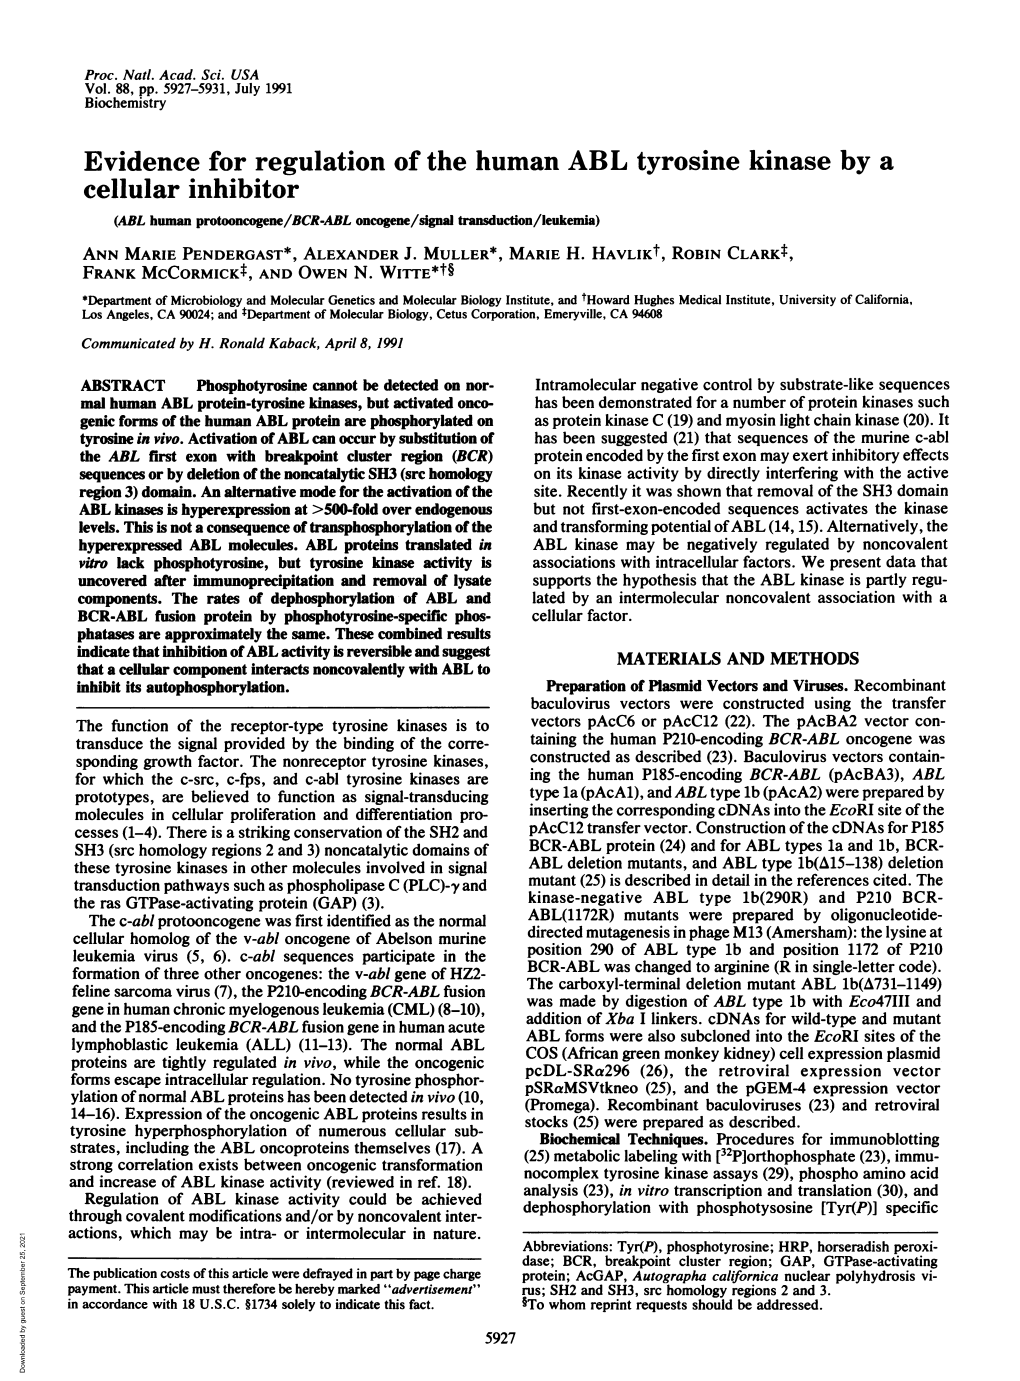 Evidence for Regulation of the Human ABL Tyrosine Kinase by A